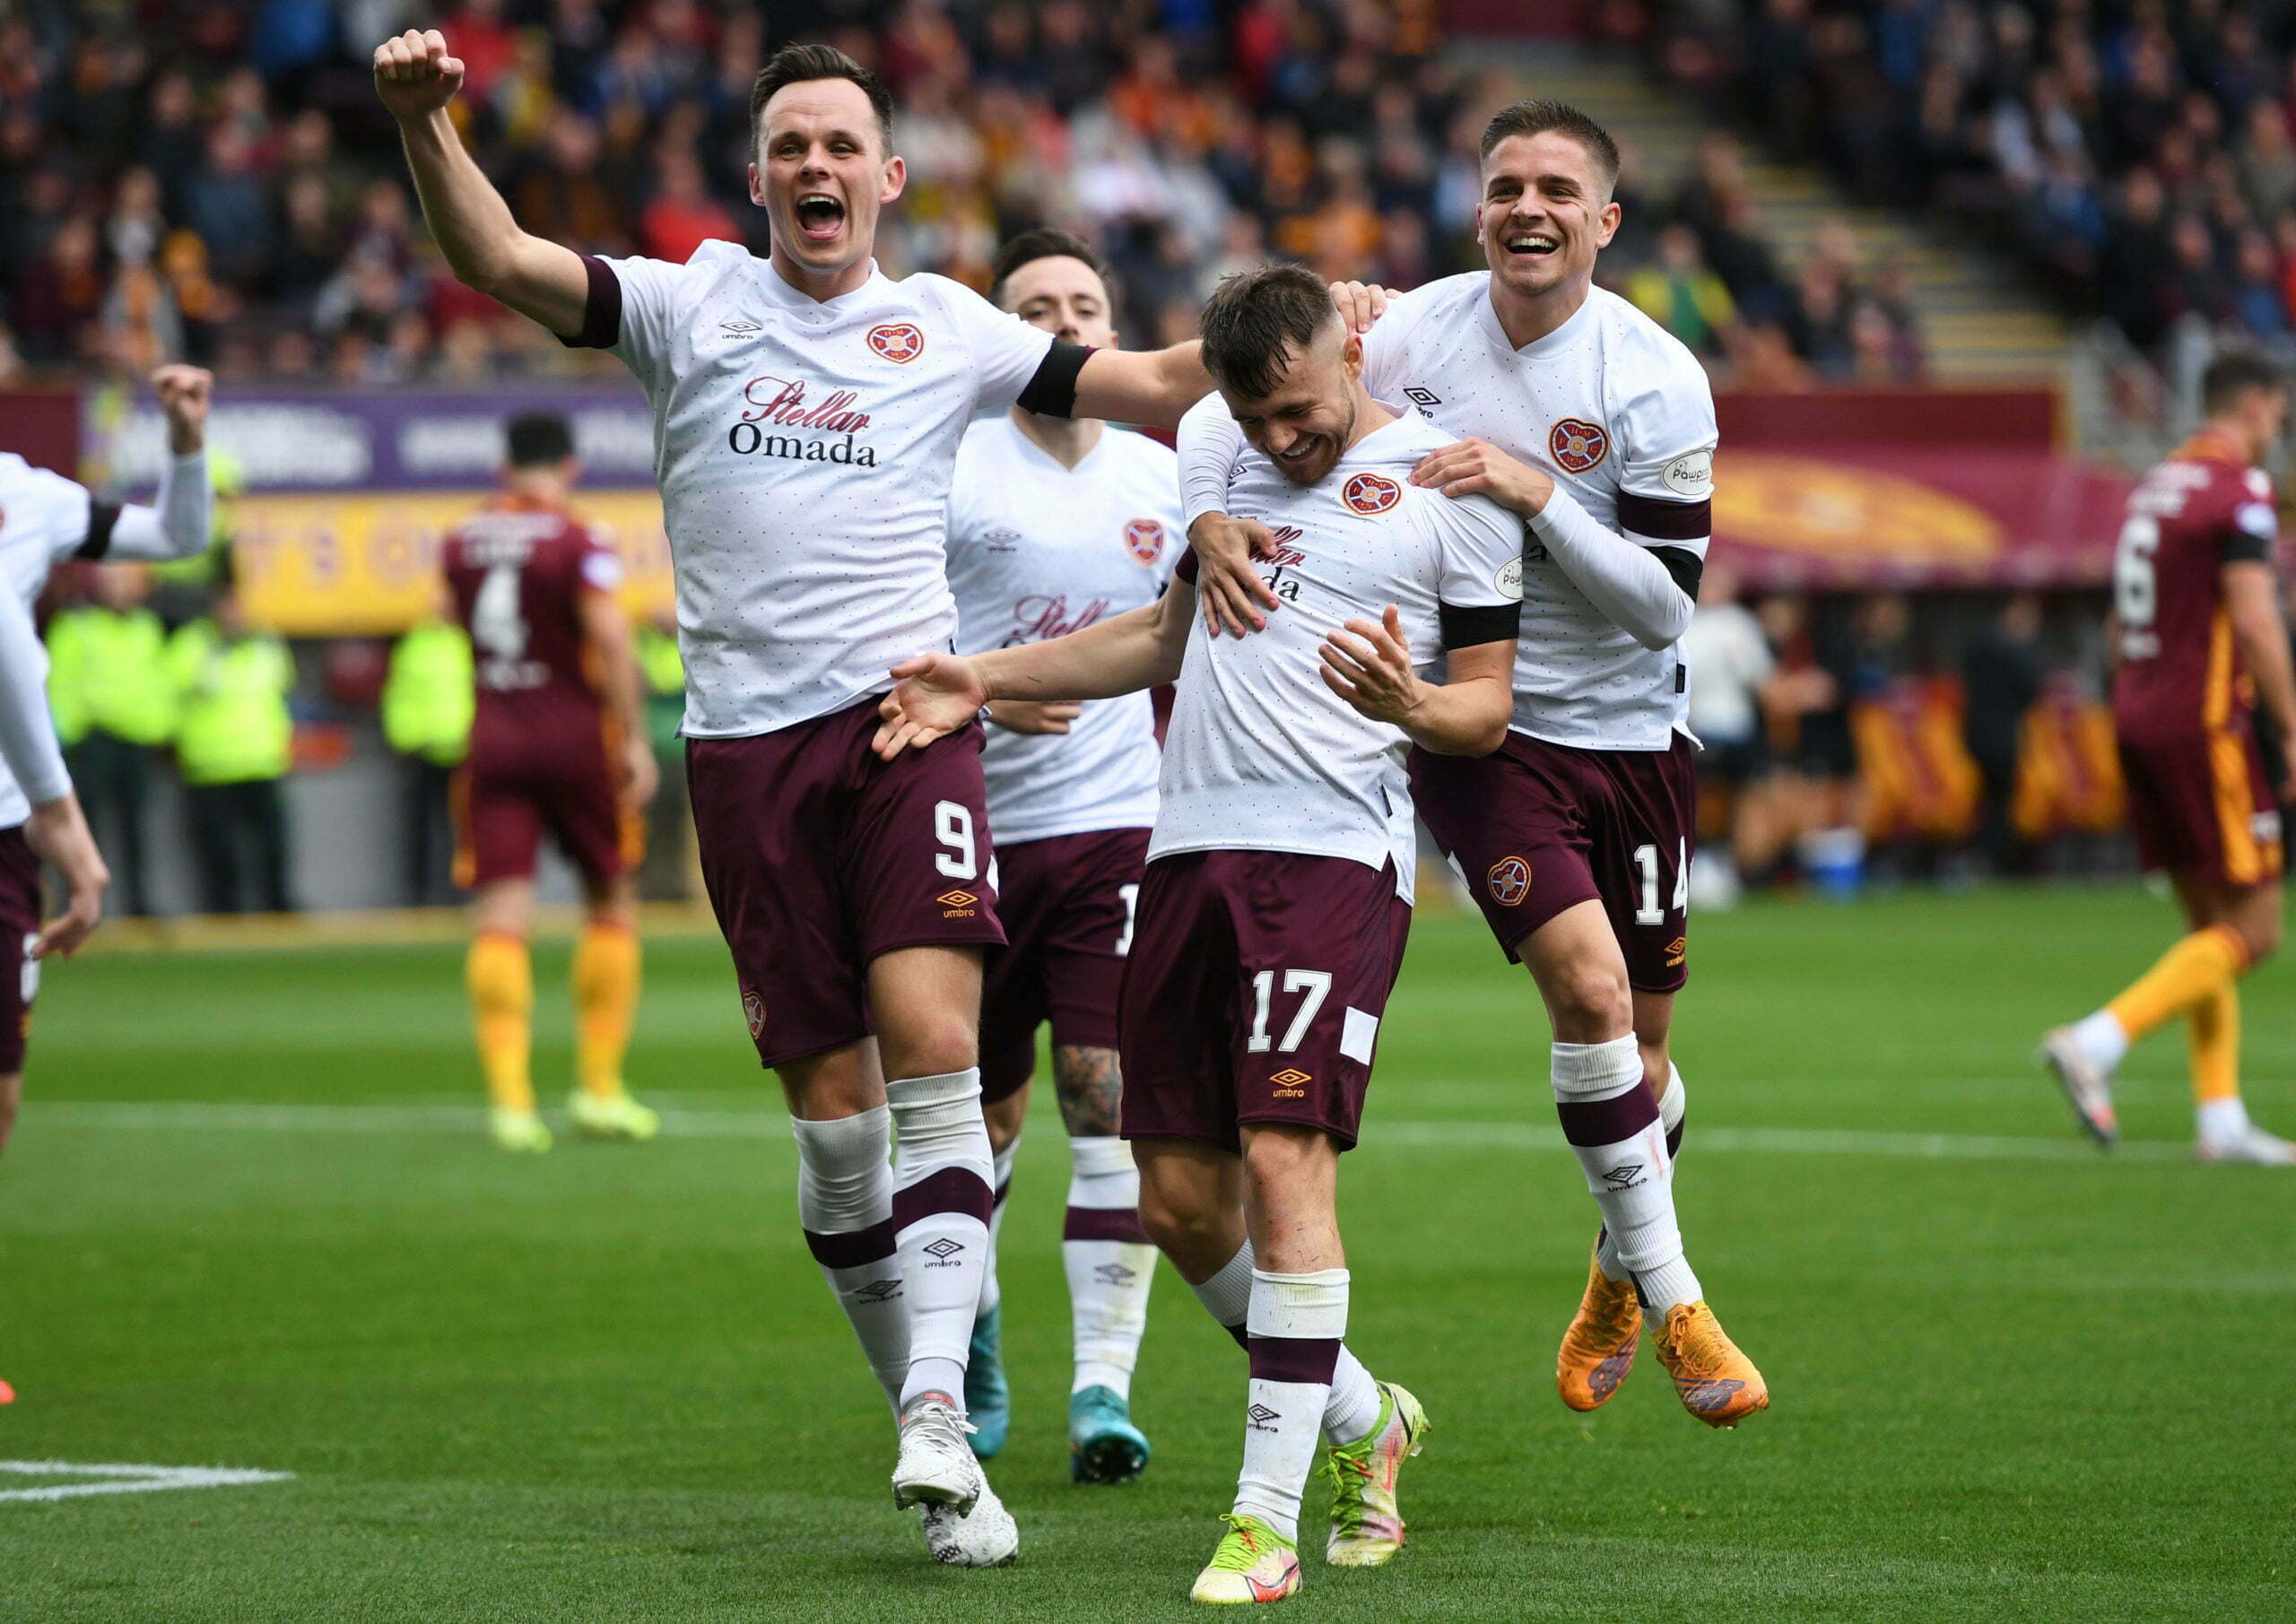 Motherwell 0-3 Hearts – Full Time Report